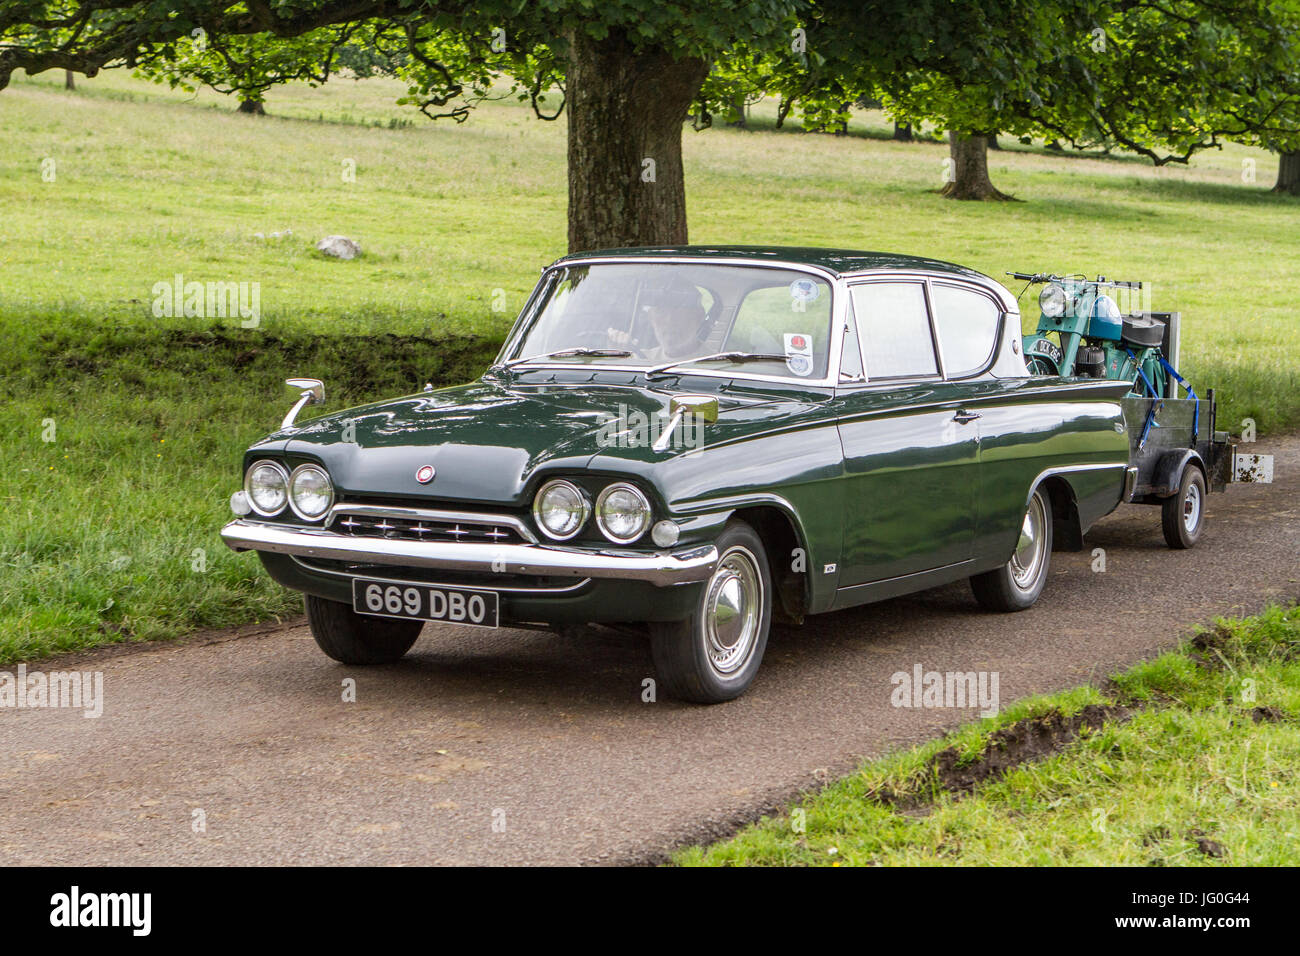 1963 green Ford Consul Classic; Mark Woodward vintage events, one of 12 classic cars shows held at different locations across the country Stock Photo